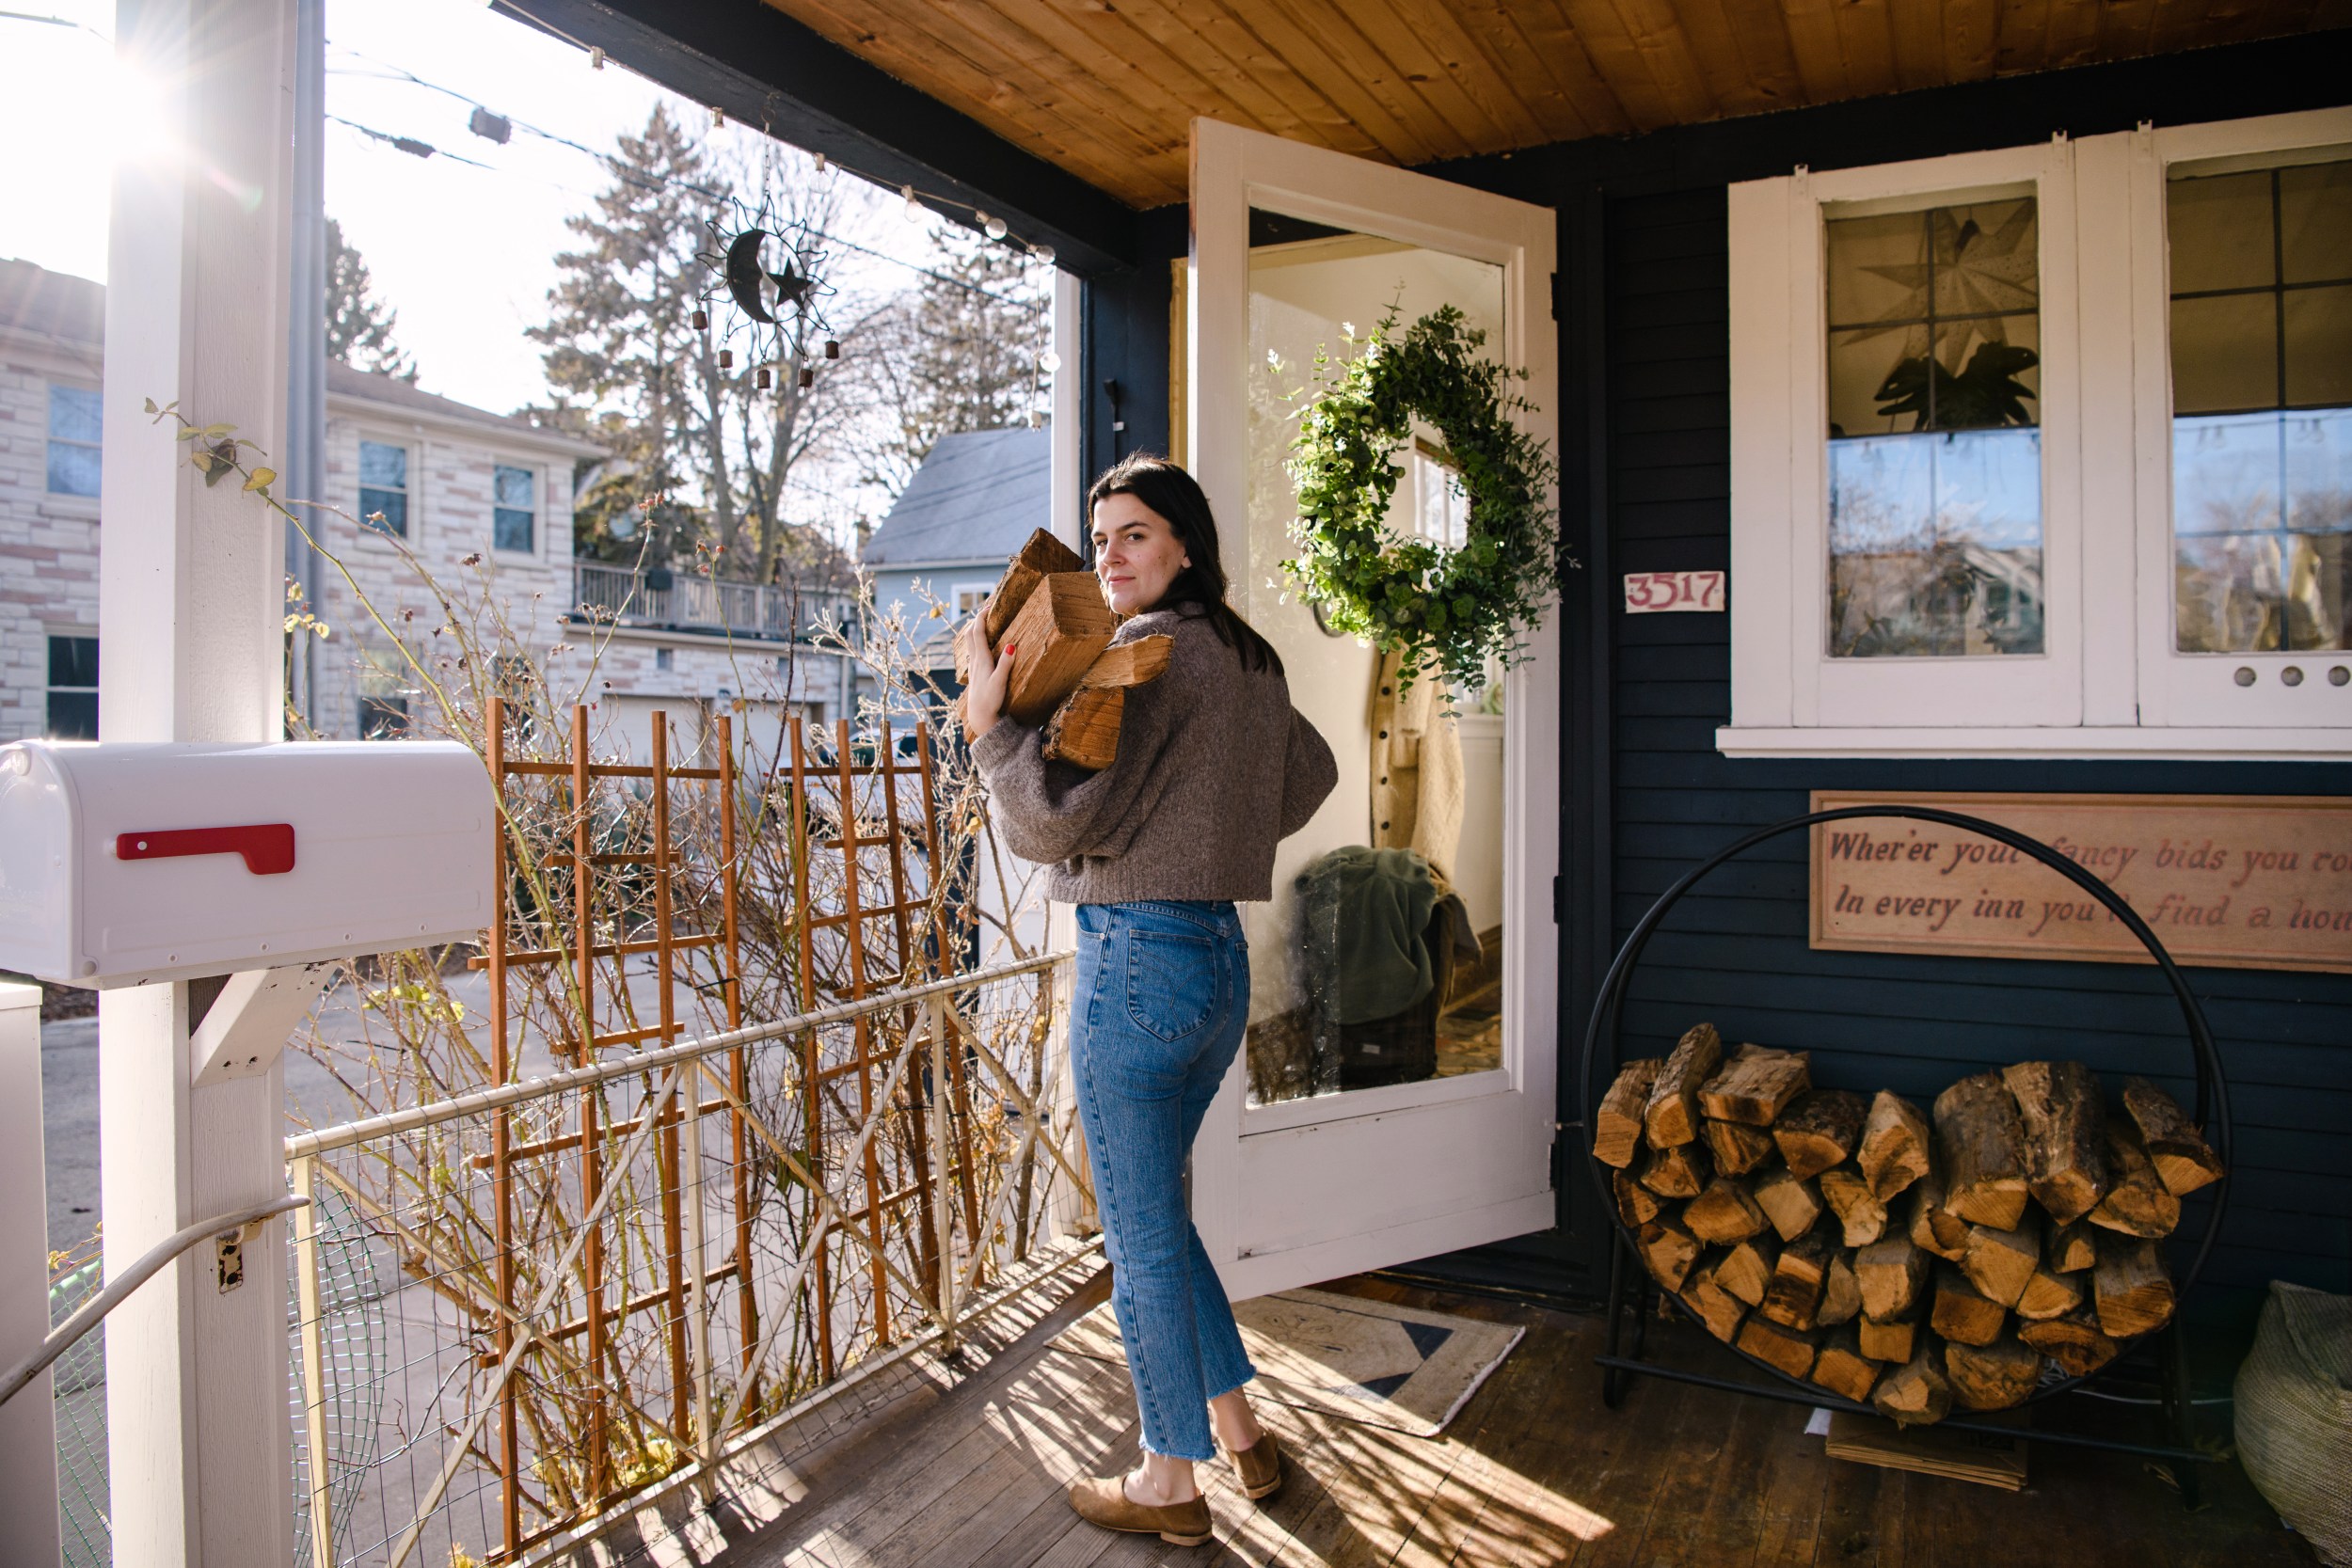 Samanta, a Host, holds an armful of chopped wood and is headed into her Airbnb.